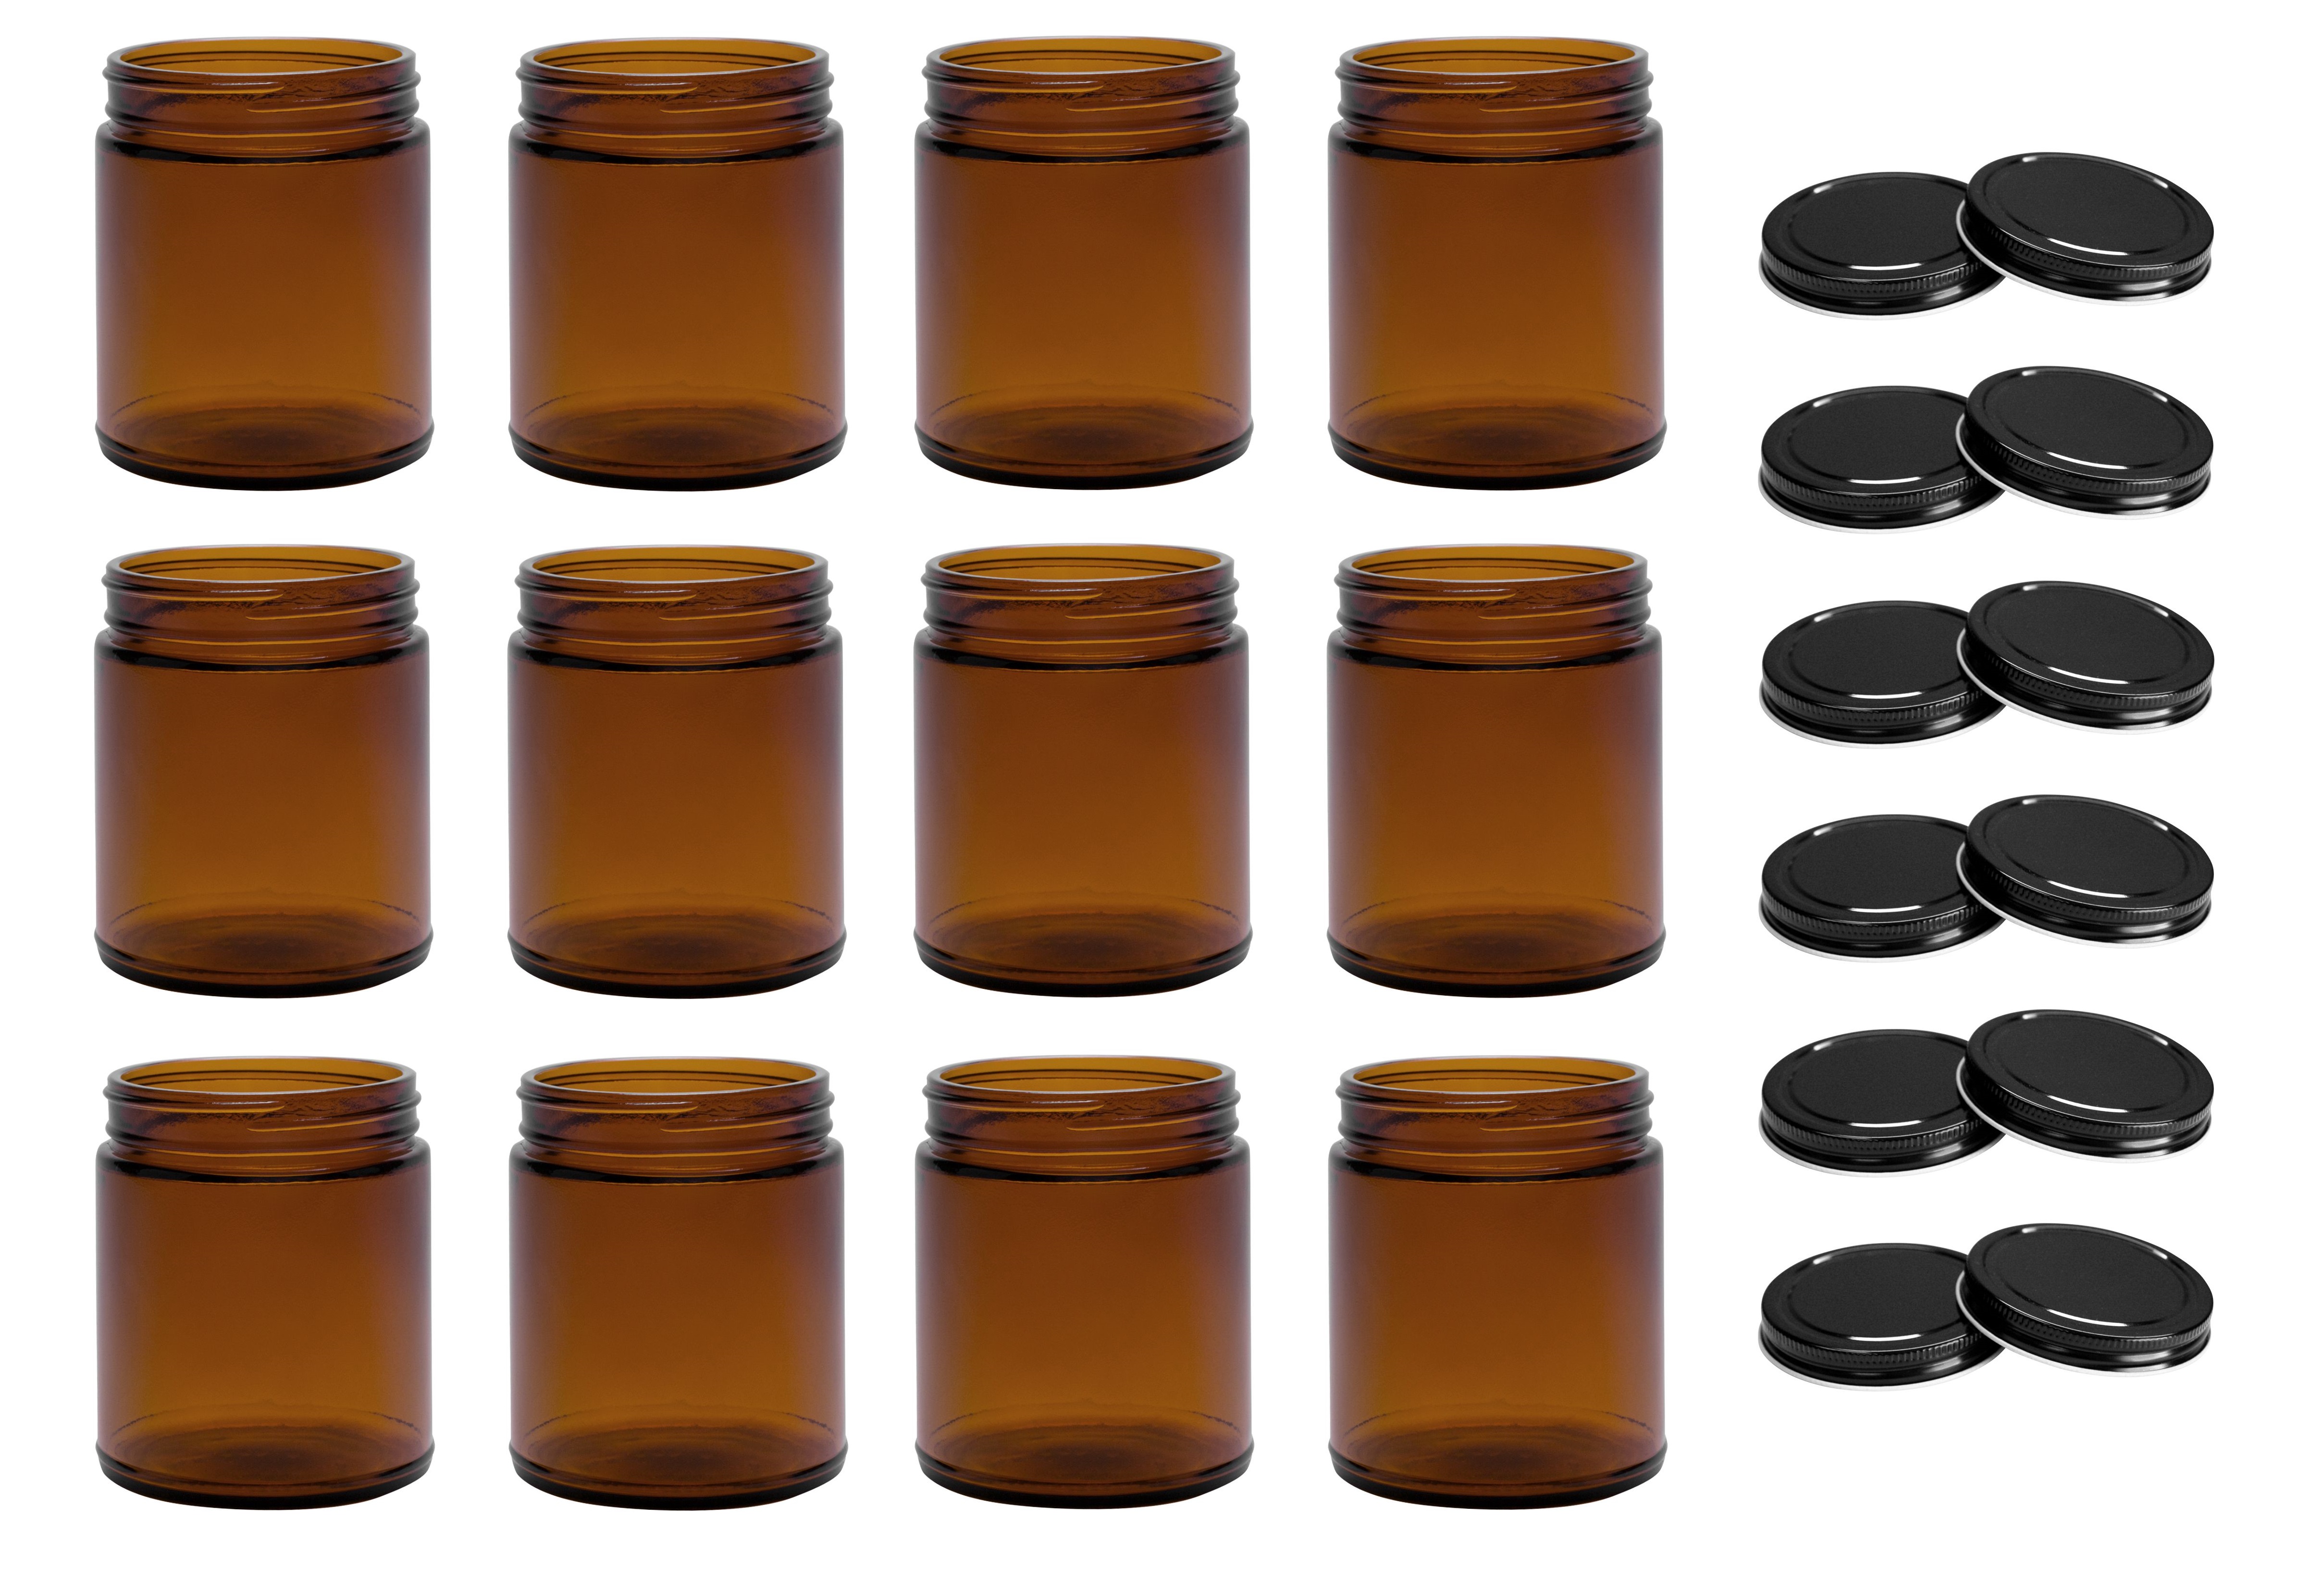 North Mountain Supply 2 Ounce Amber Glass Straight Sided Spice/Canning Jars  - with 53mm Gold Metal Lids - Case of 24